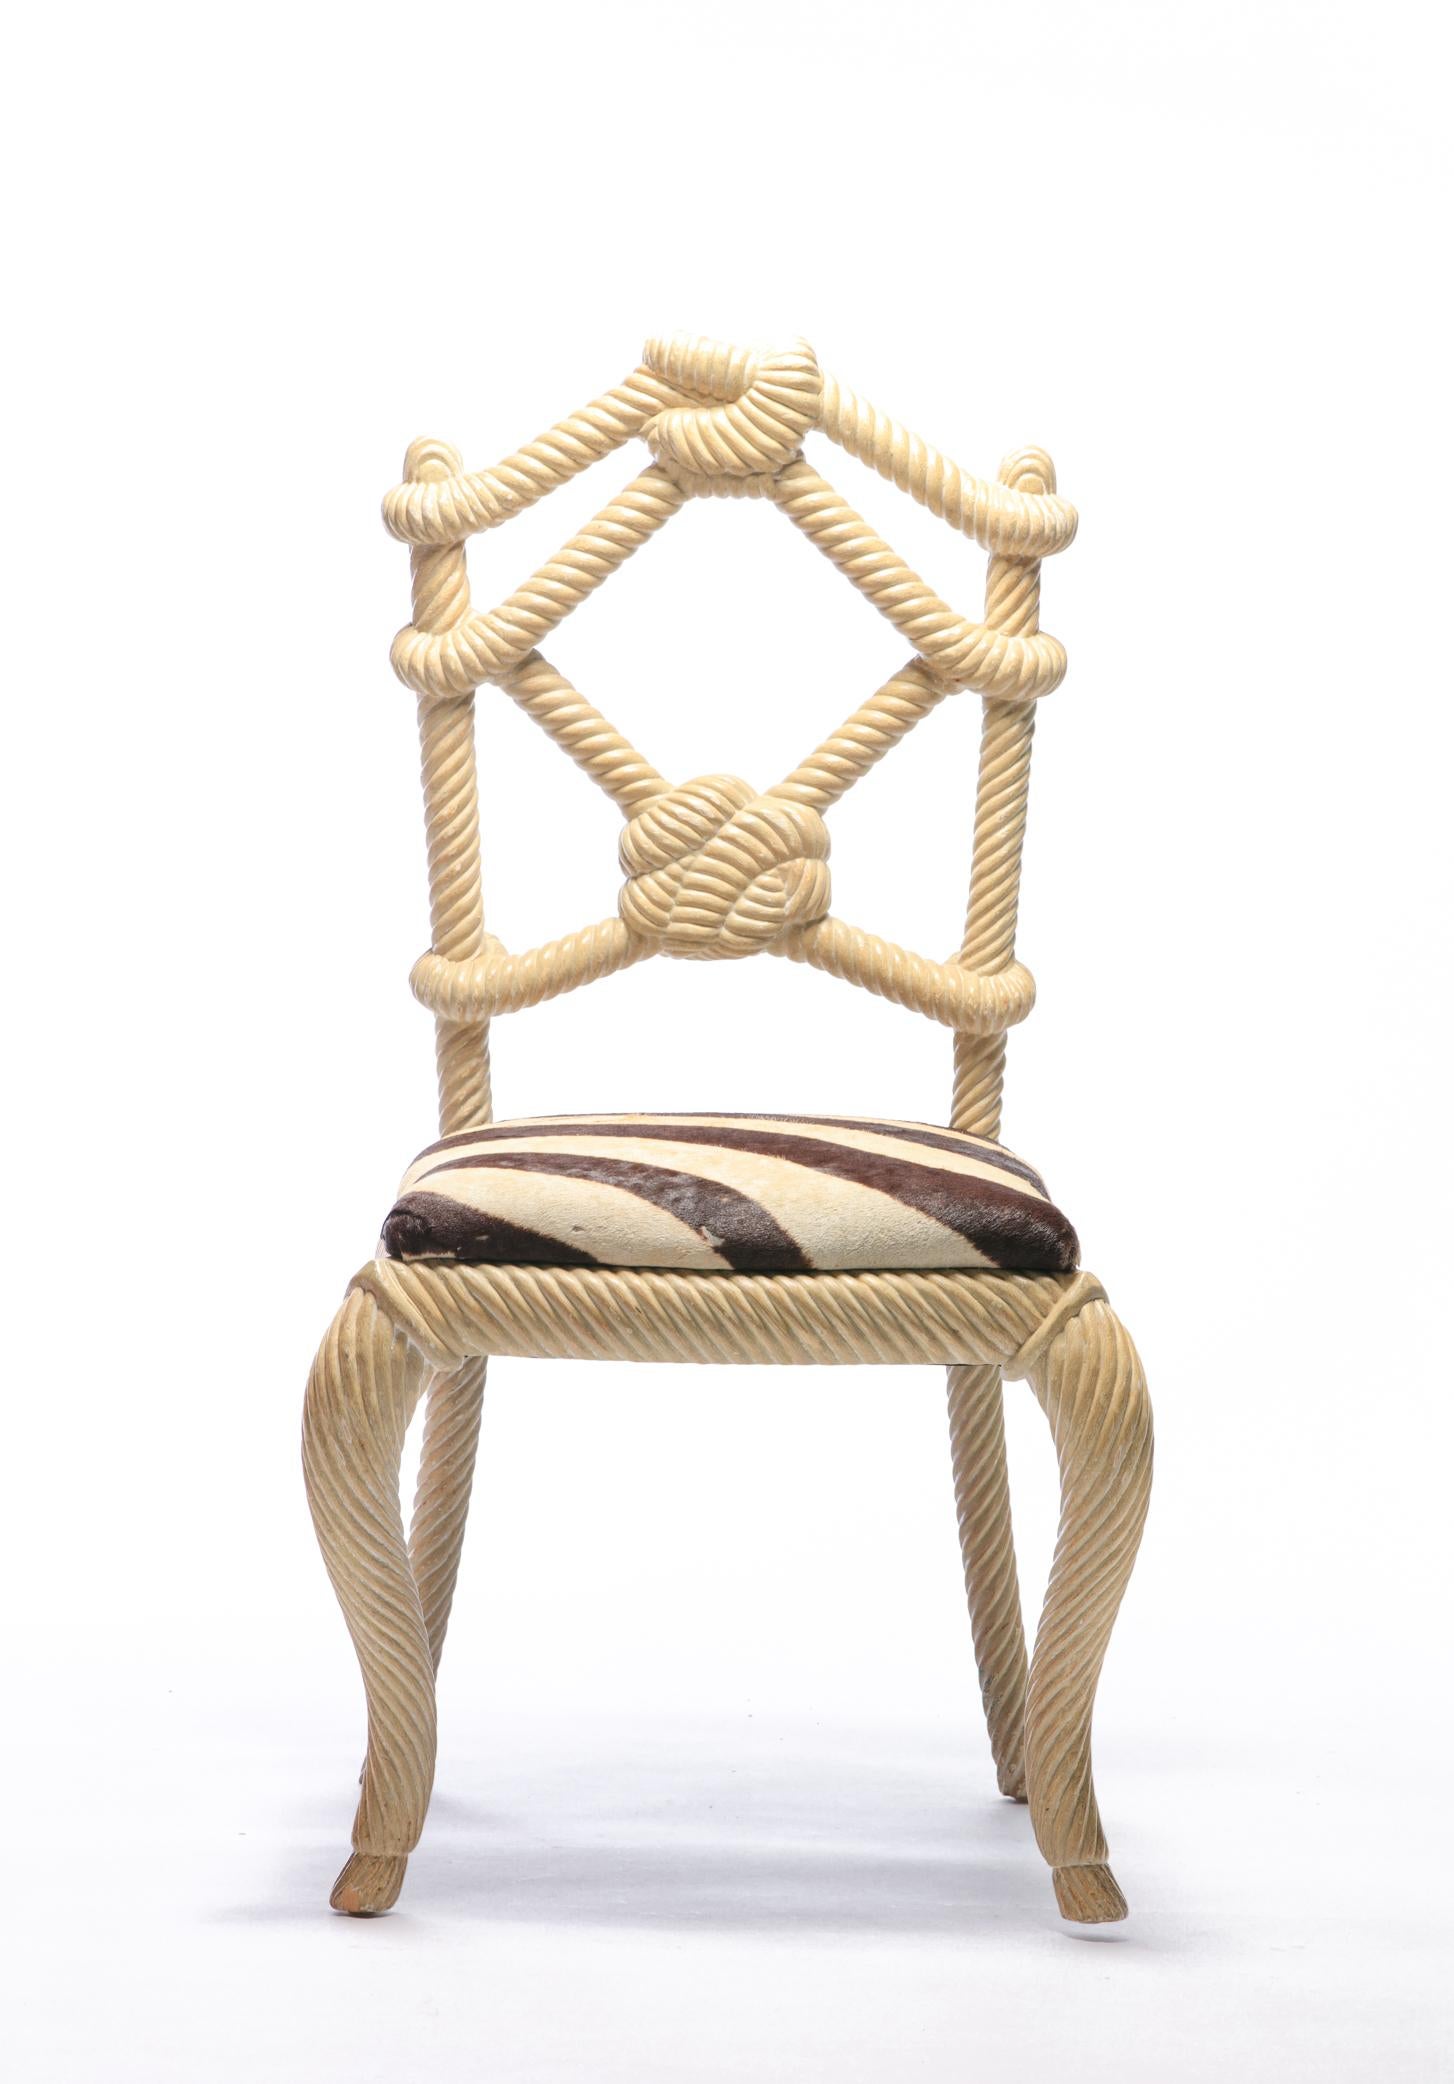 Hollywood Regency Pair of Rope Chairs from Viceroy Miami with Zebra Hide Upholstered Seats